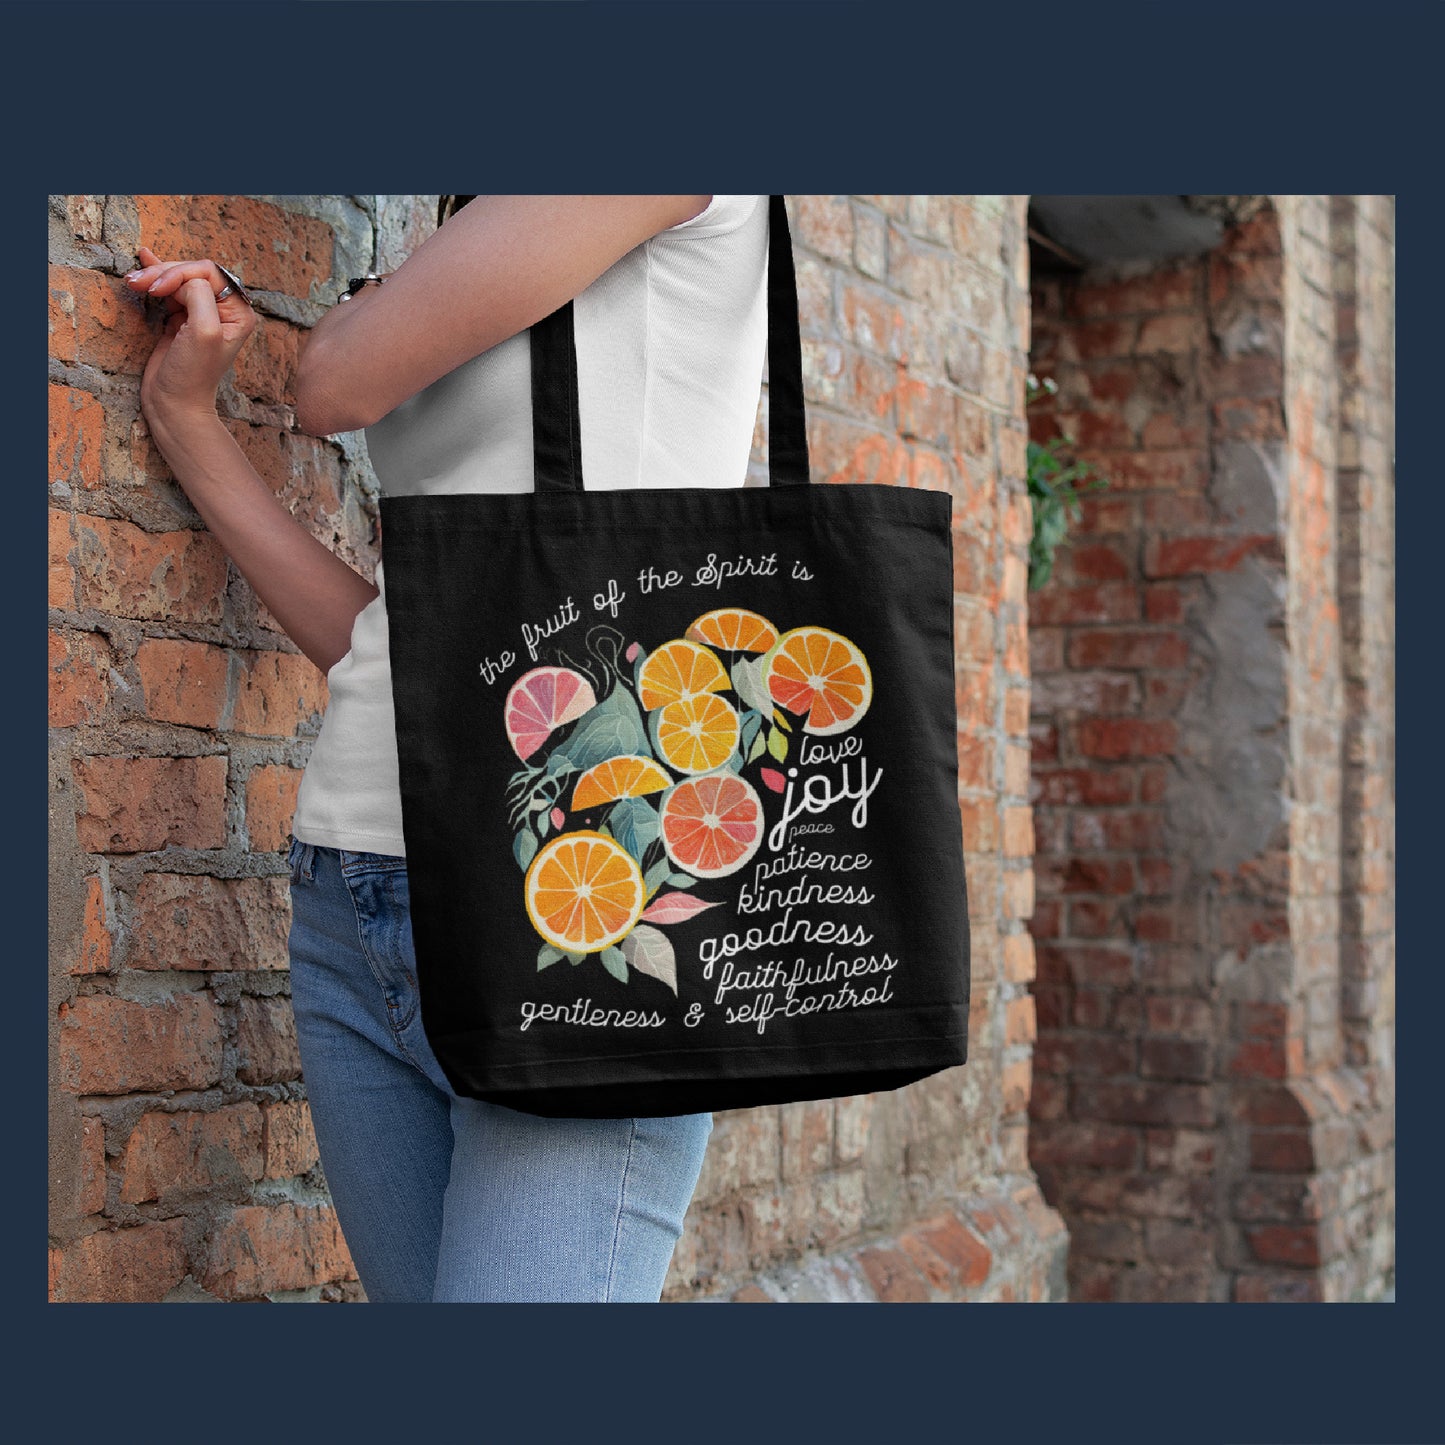 Christian Tote Bag | Christian Gifts For Women of Faith | Bible Verse Tote Bag | Christianity Gifts | Religious Gifts | Fruit of the Spirit